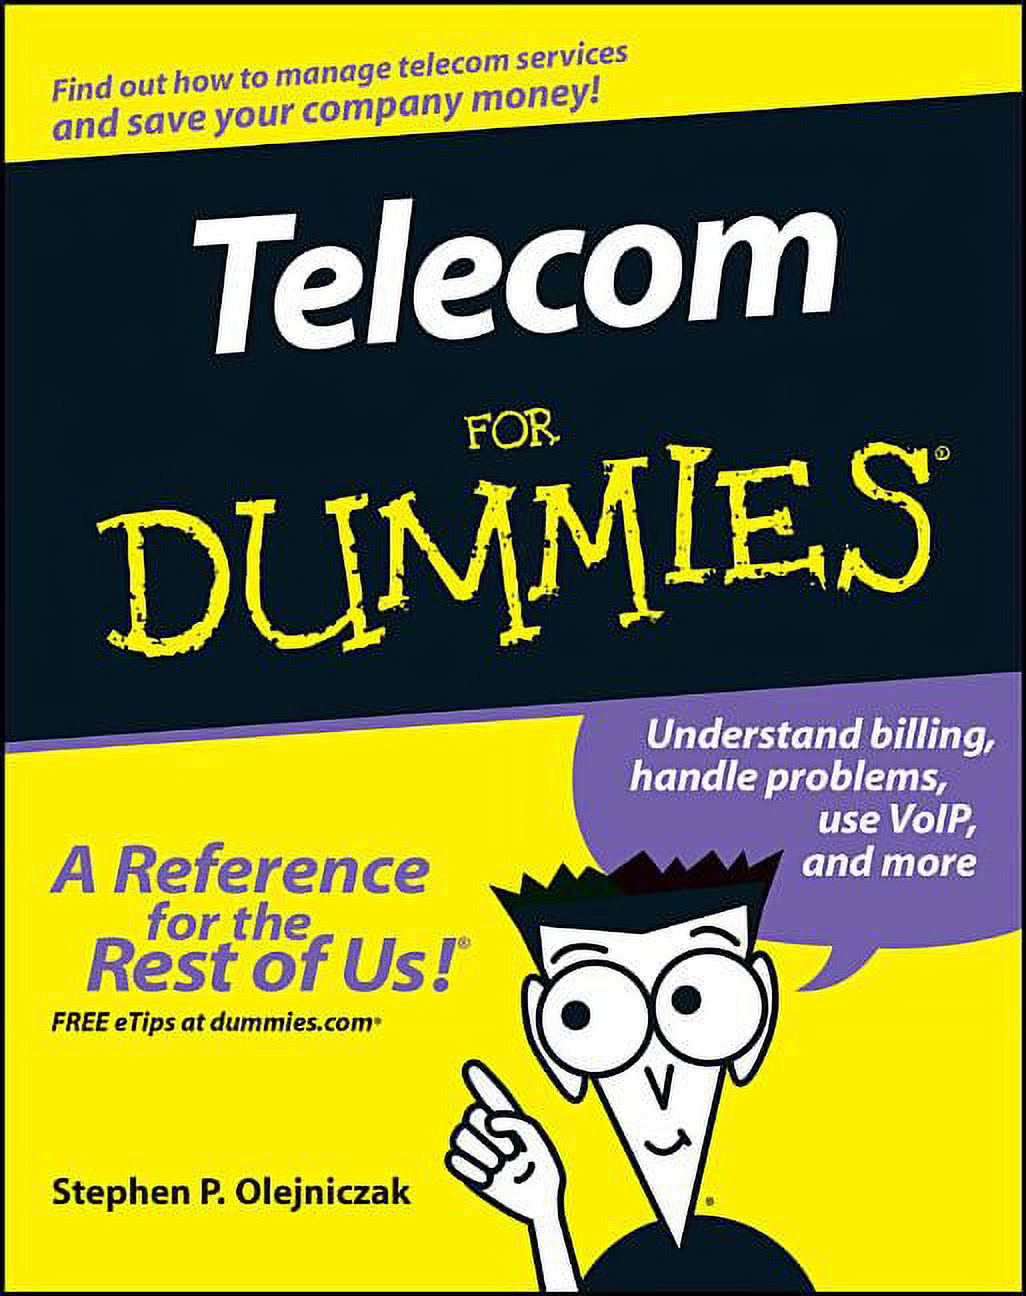 For Dummies: Telecom for Dummies (Paperback) - image 1 of 1